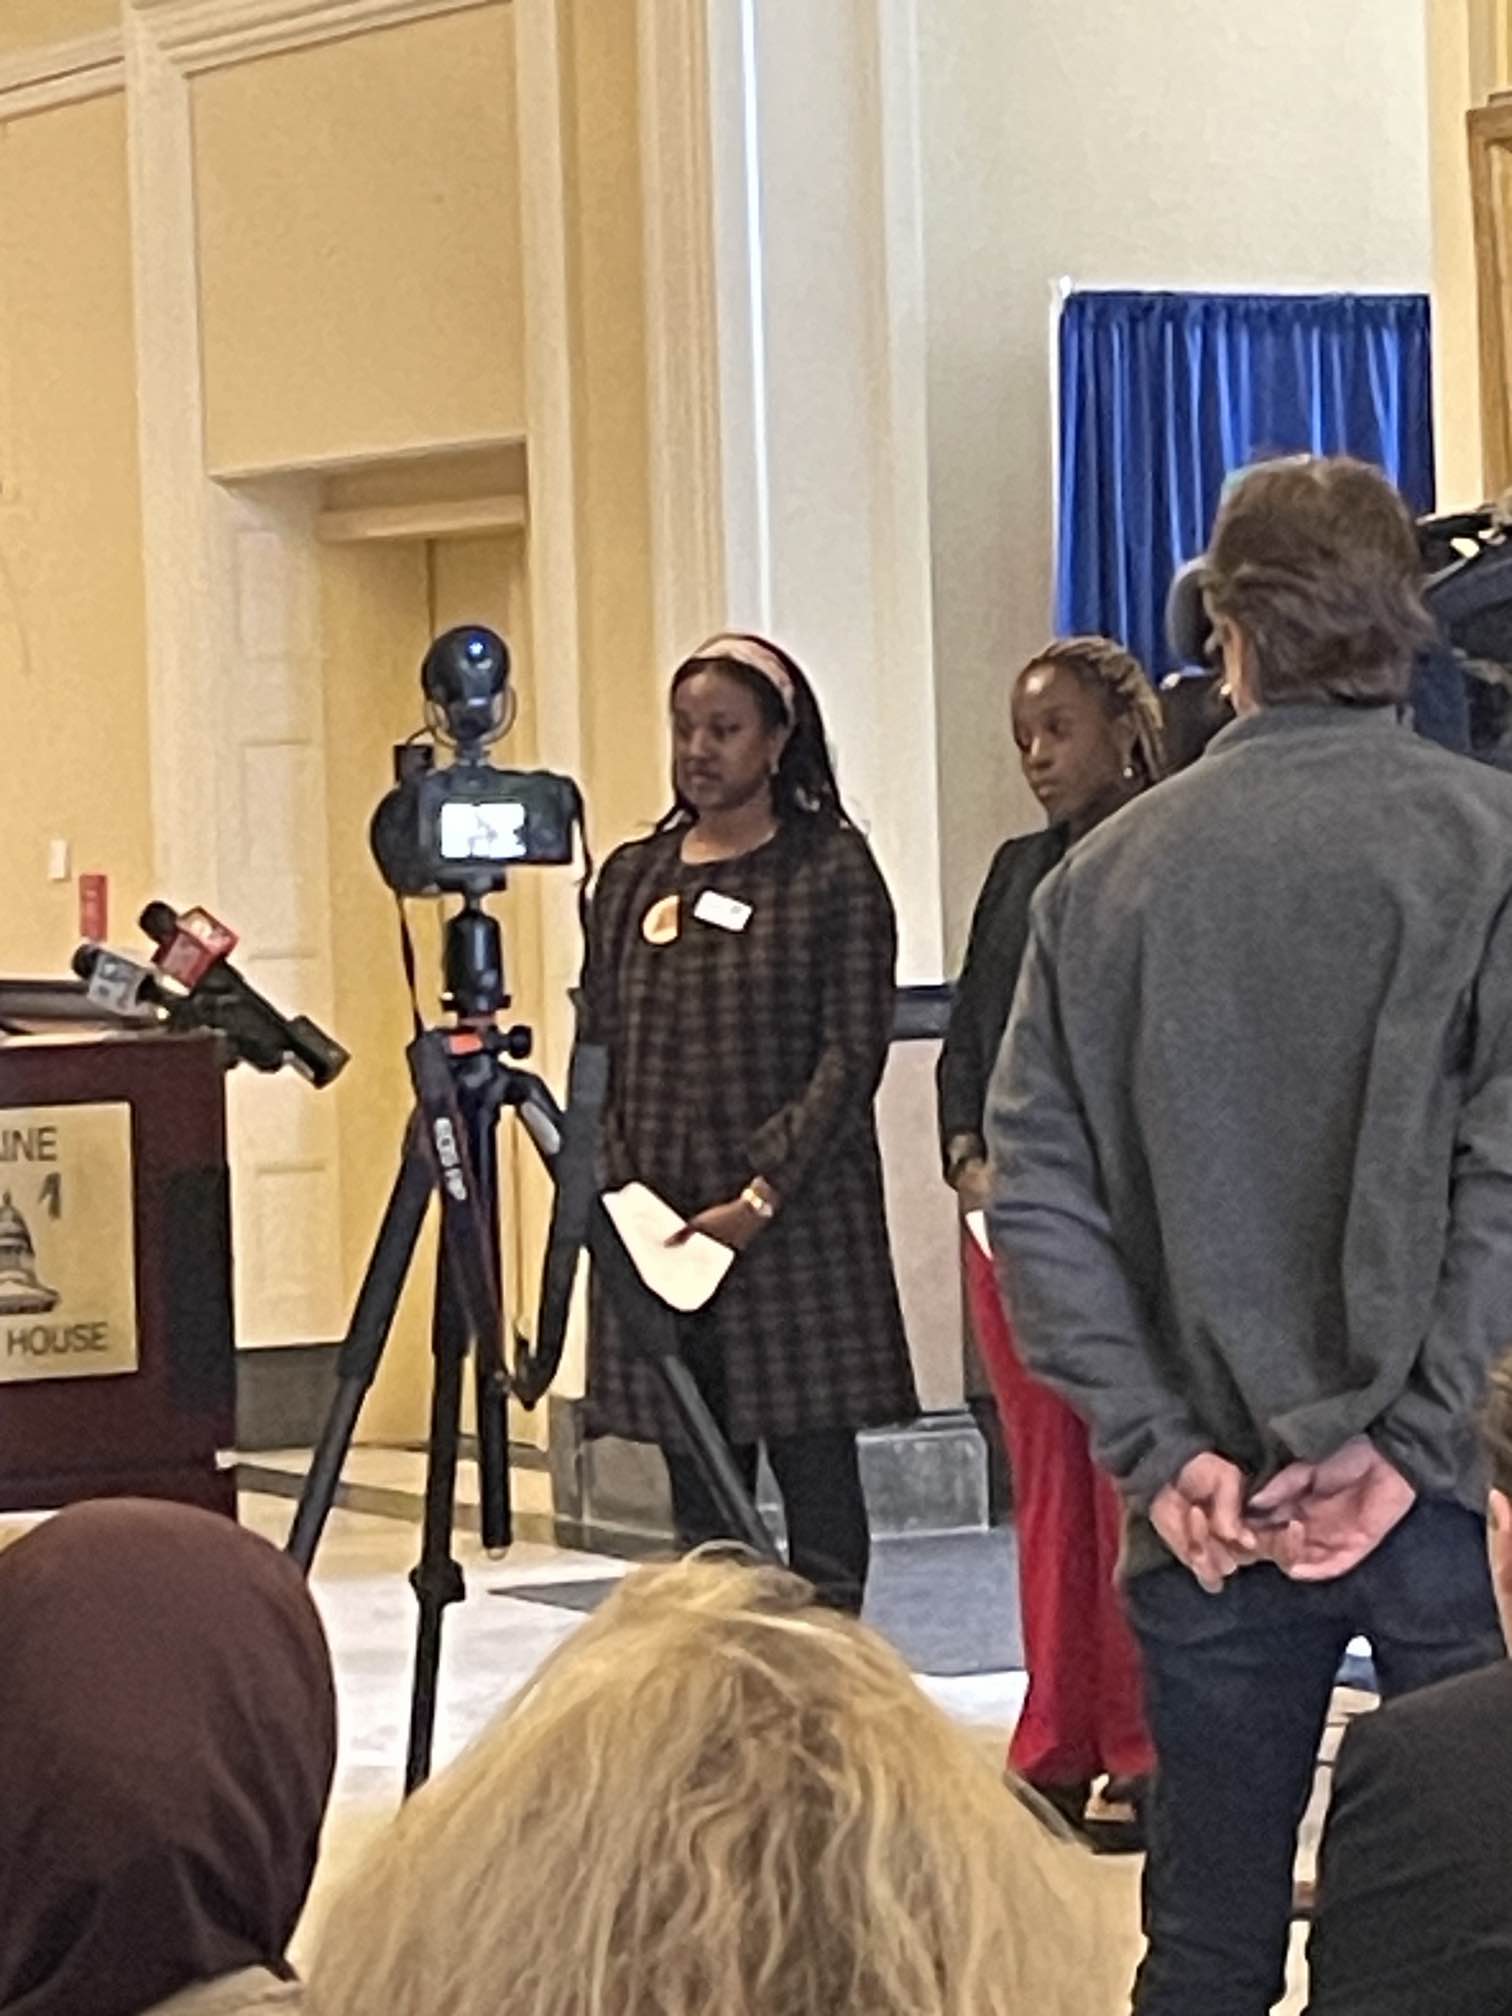 Remarks at Black Voices Advocacy Day at the State House